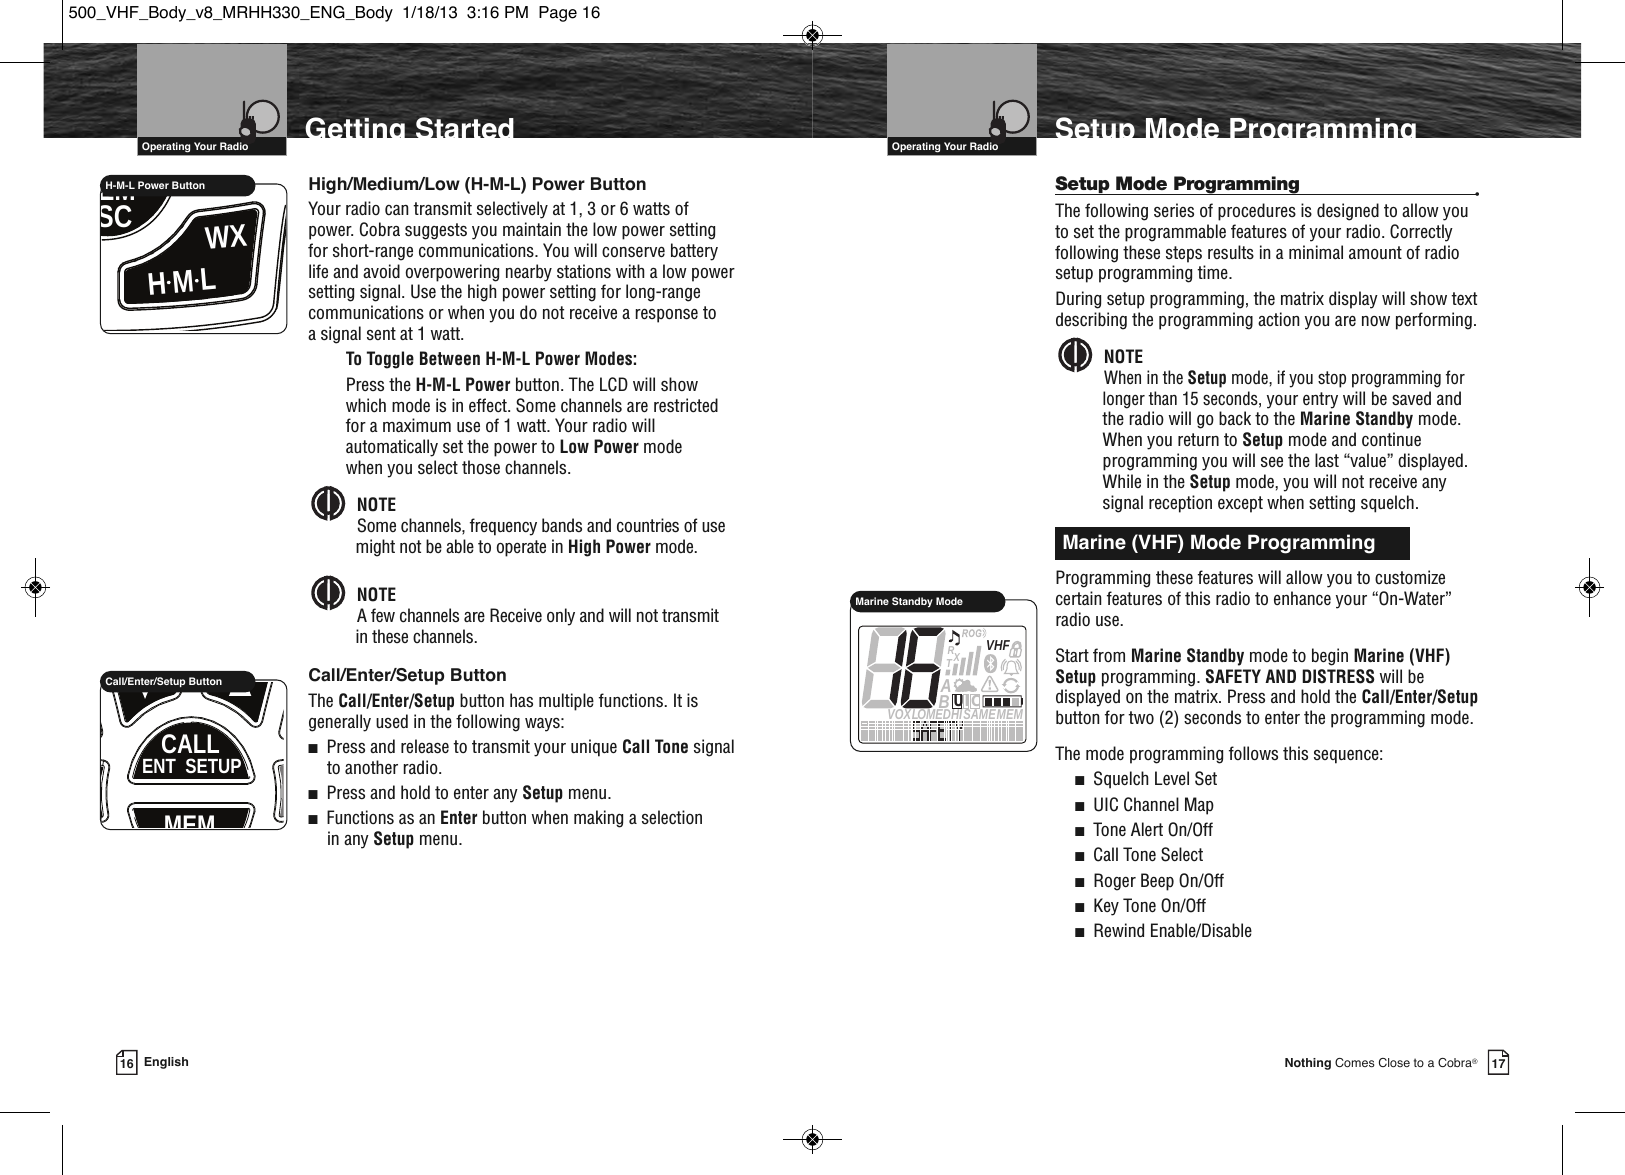 Page 11 of Cobra Electronics MRHH500 BT ACCESSORY IN MARINE RADIO User Manual MRHH330 ENG Body